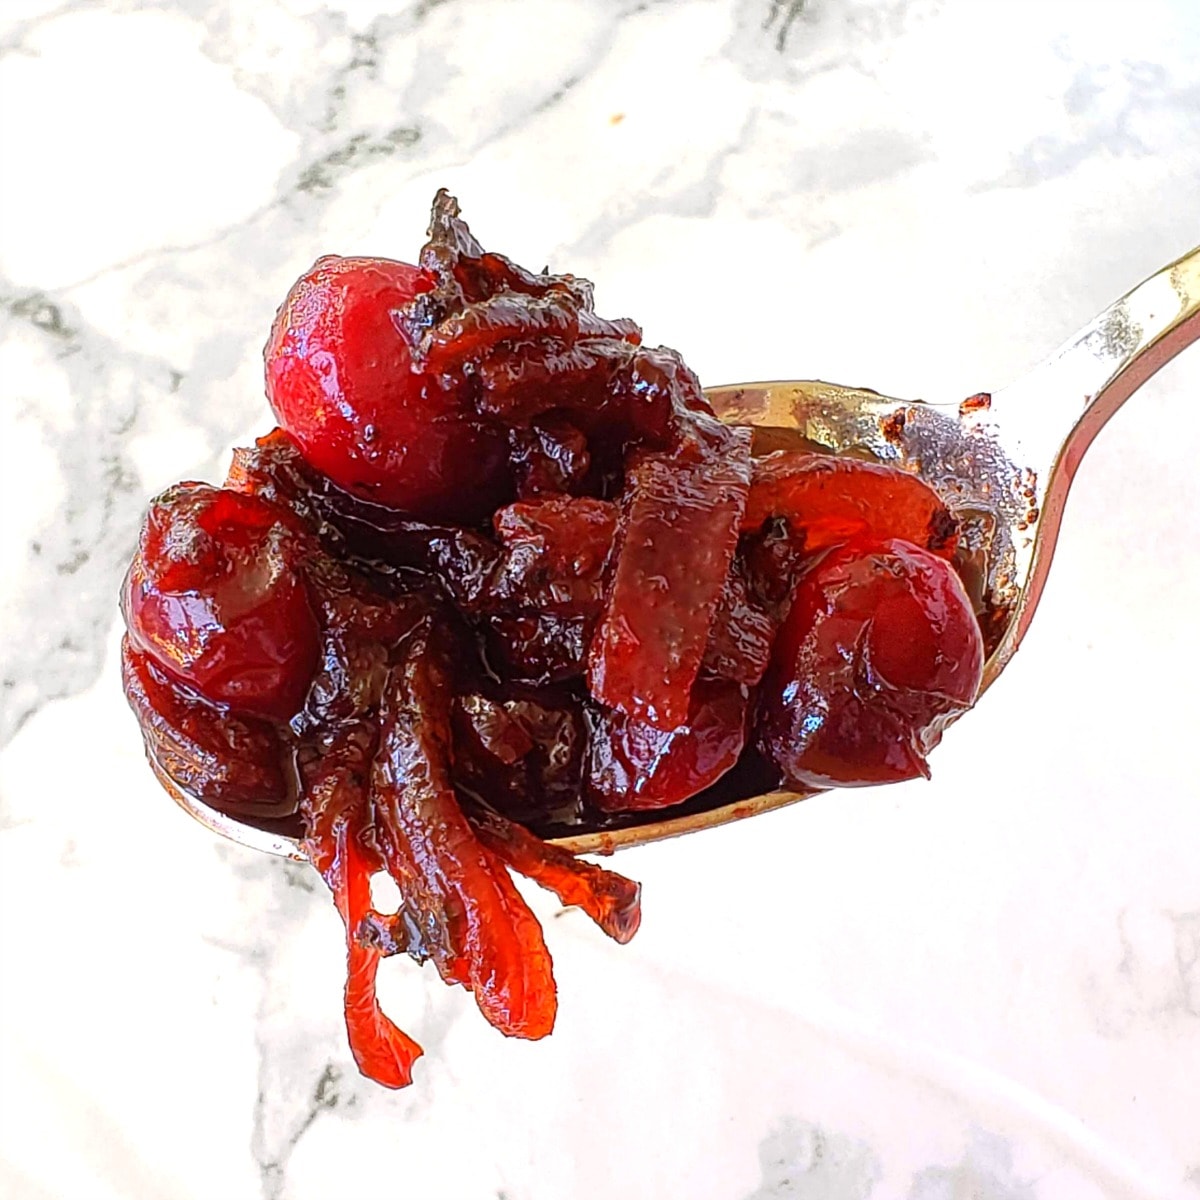 Cranberry Sauce with Caramelized Onions piled on a silver spoon with onions dangling against a white marble background